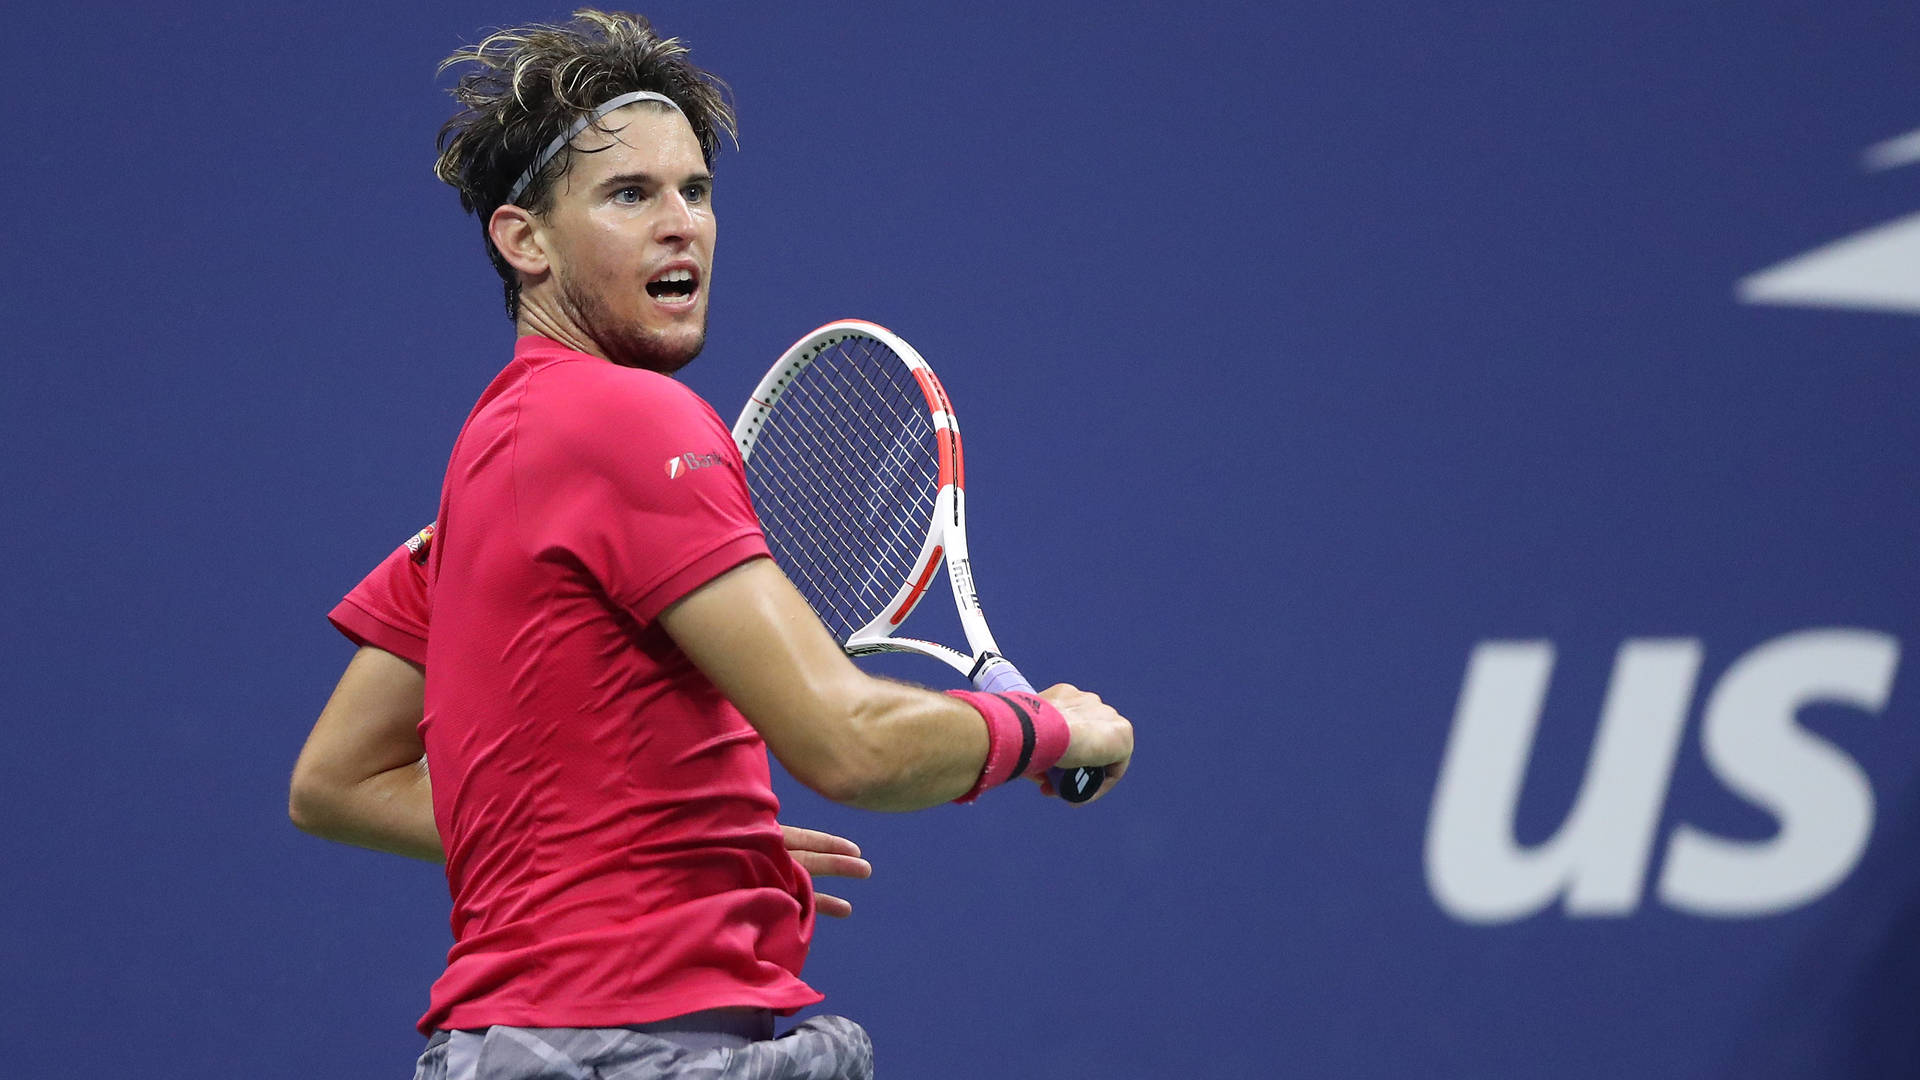 Dominic Thiem In Us Open Background